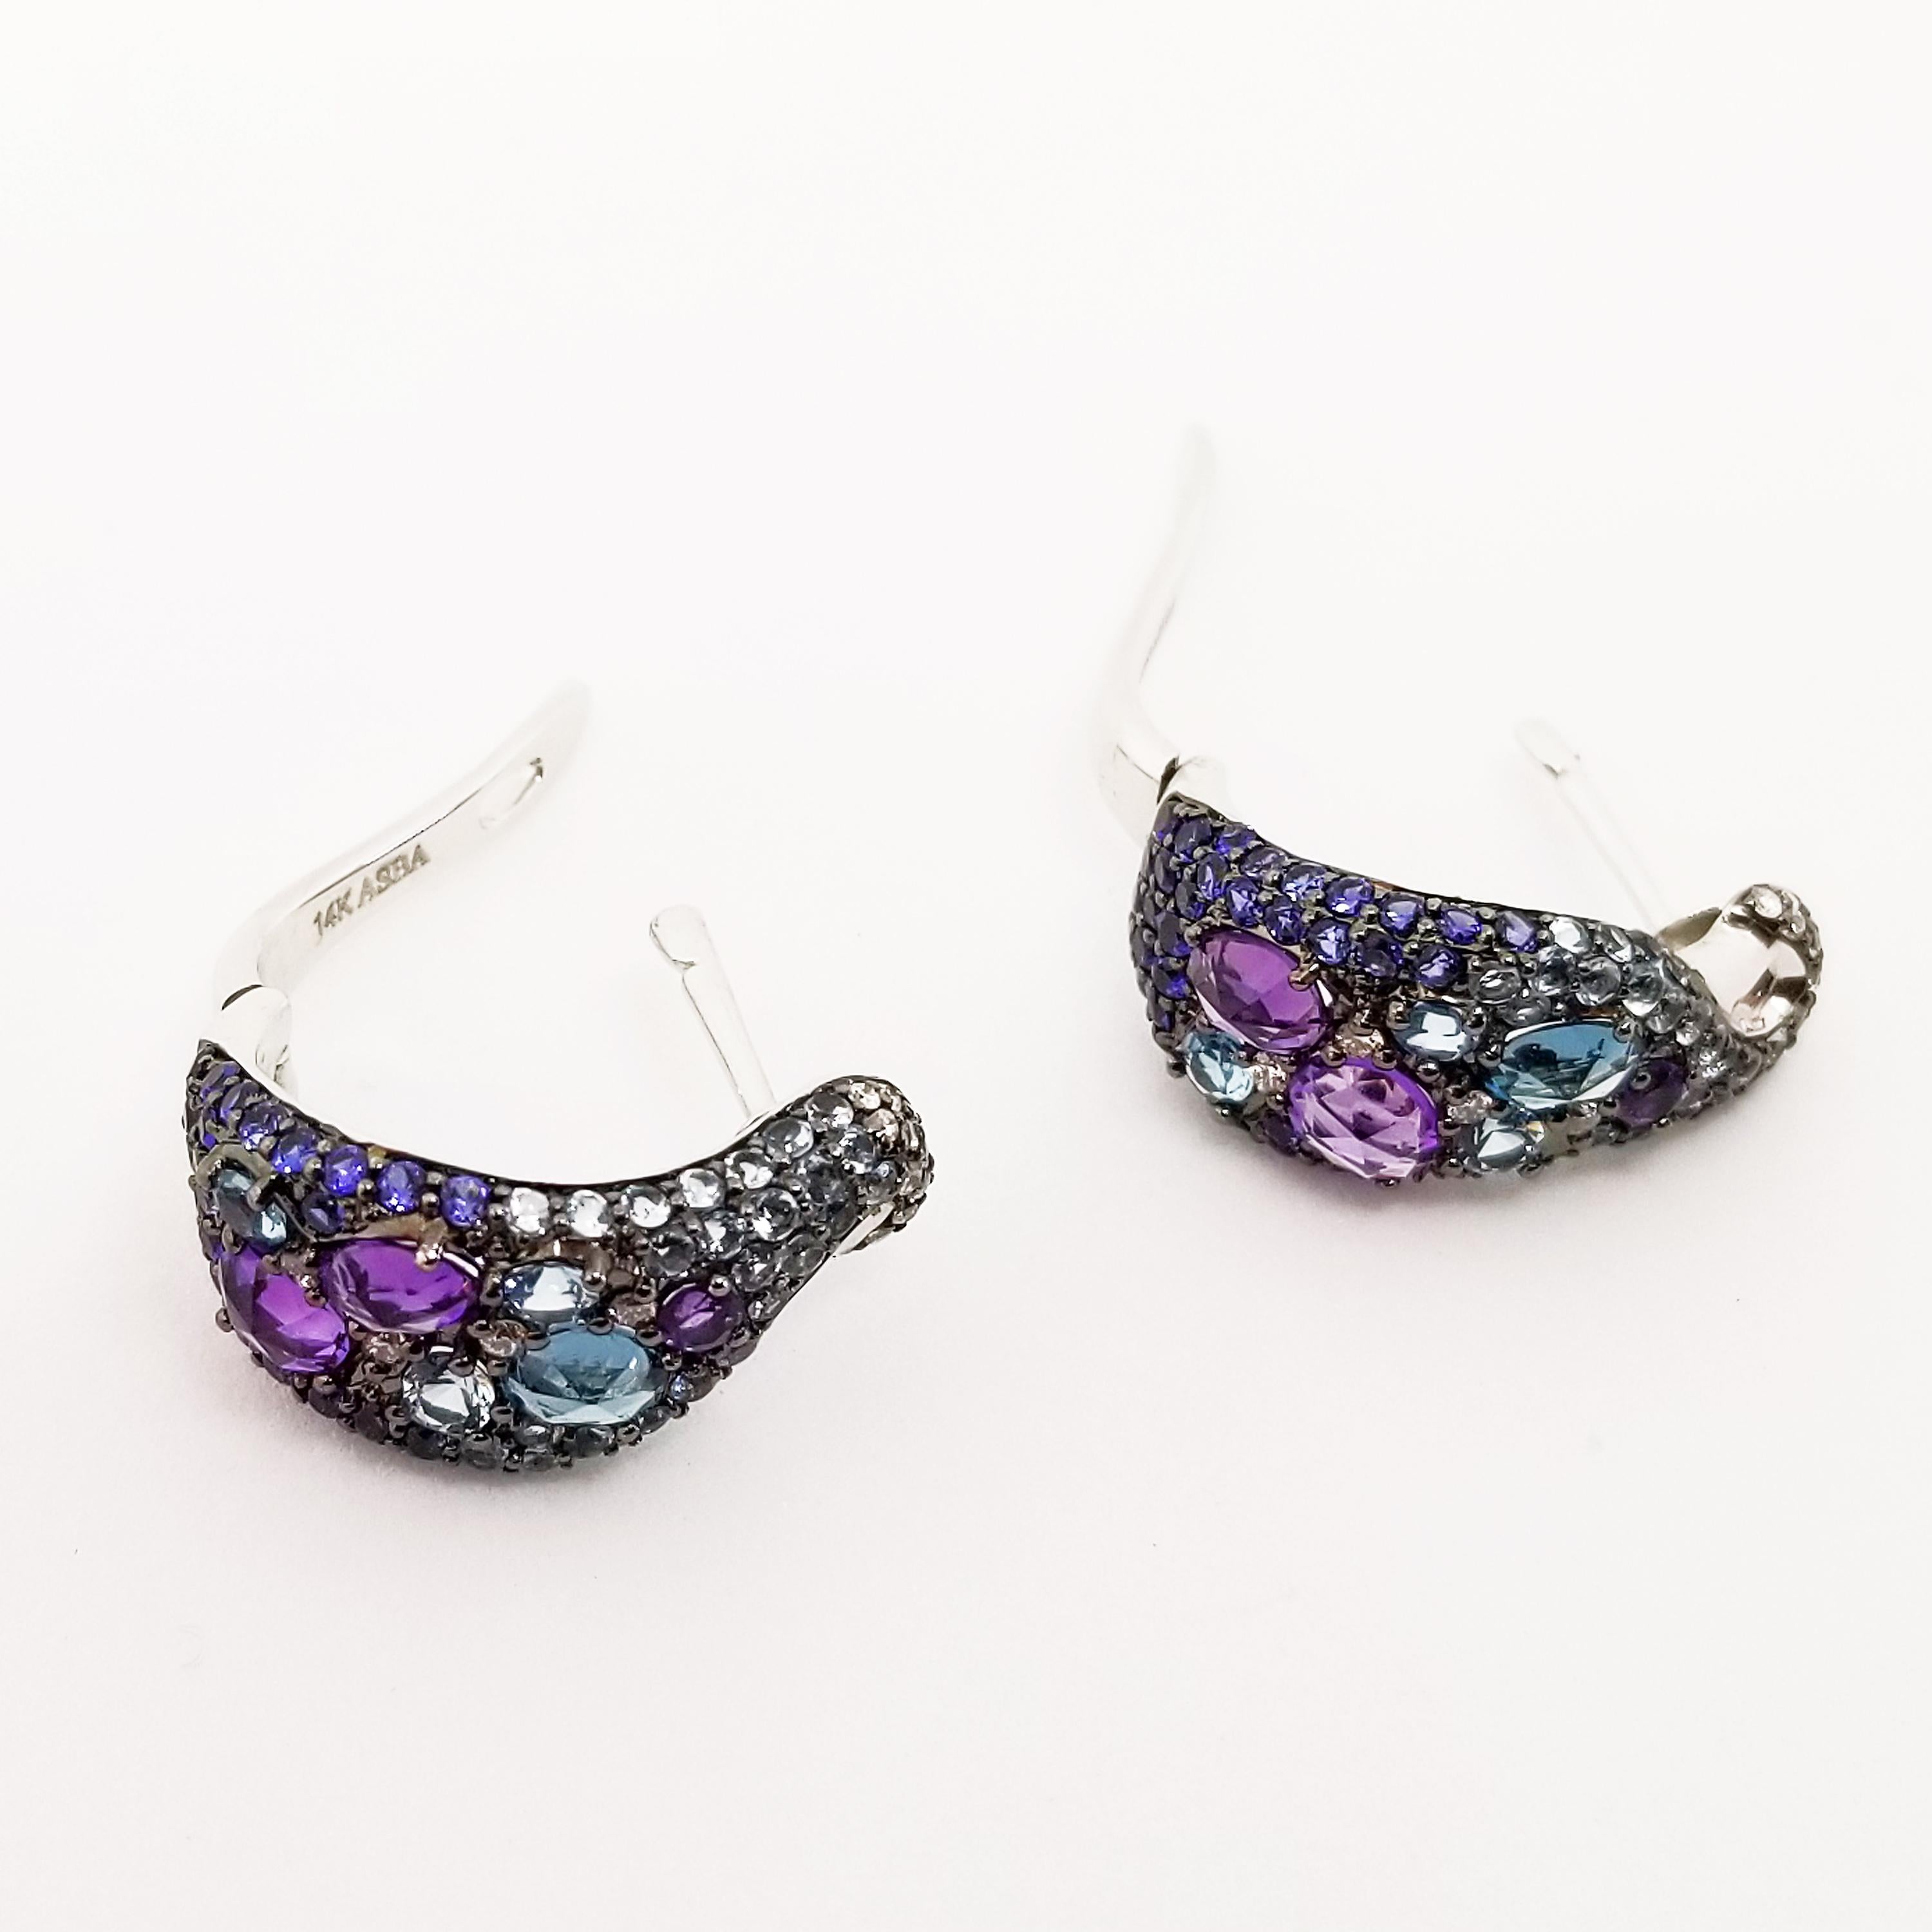 One pair of Post and Lever Back Gemstone Encrusted Hoops featuring faceted, Brilliant and Rose Cut Stones. The uniquely curved Earrings are set with an Ombre of Colors from Purple to Blue and White to Champagne. Pave set in the Earrings are 0.15